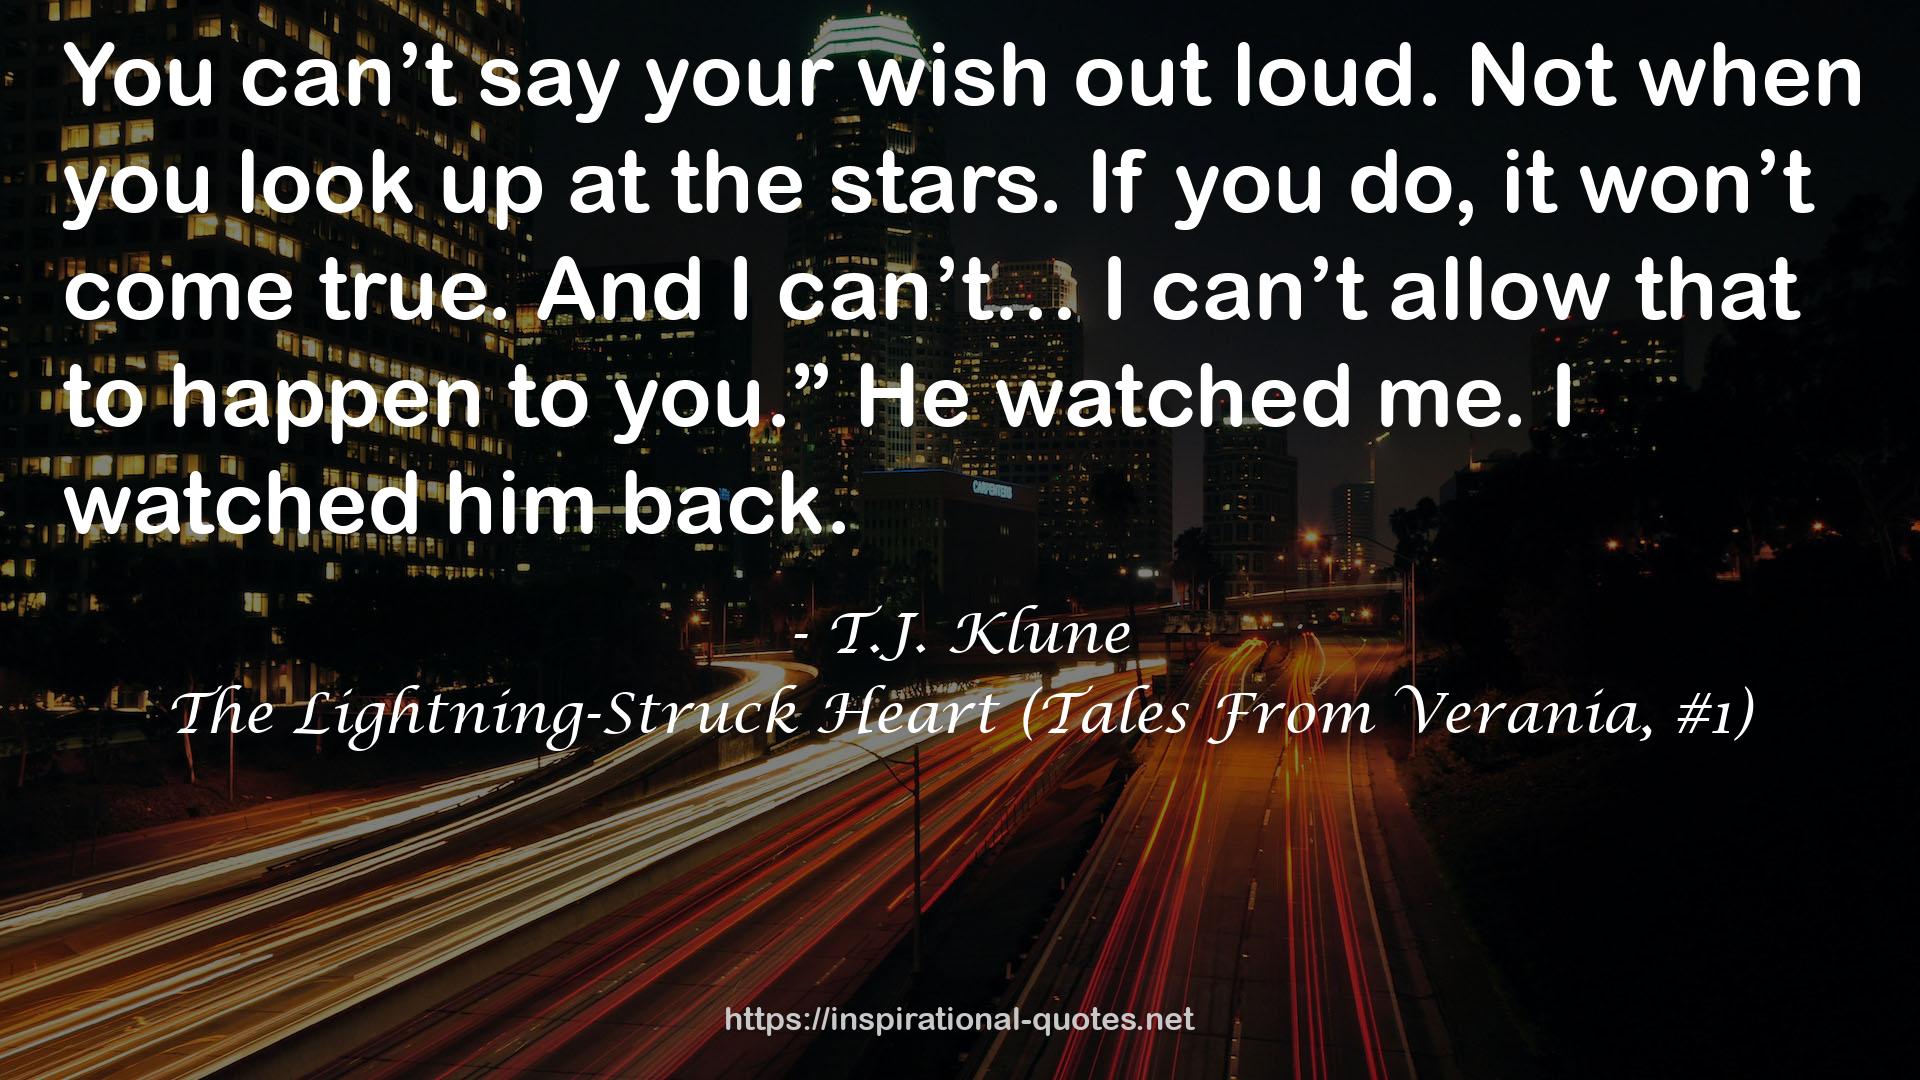 The Lightning-Struck Heart (Tales From Verania, #1) QUOTES